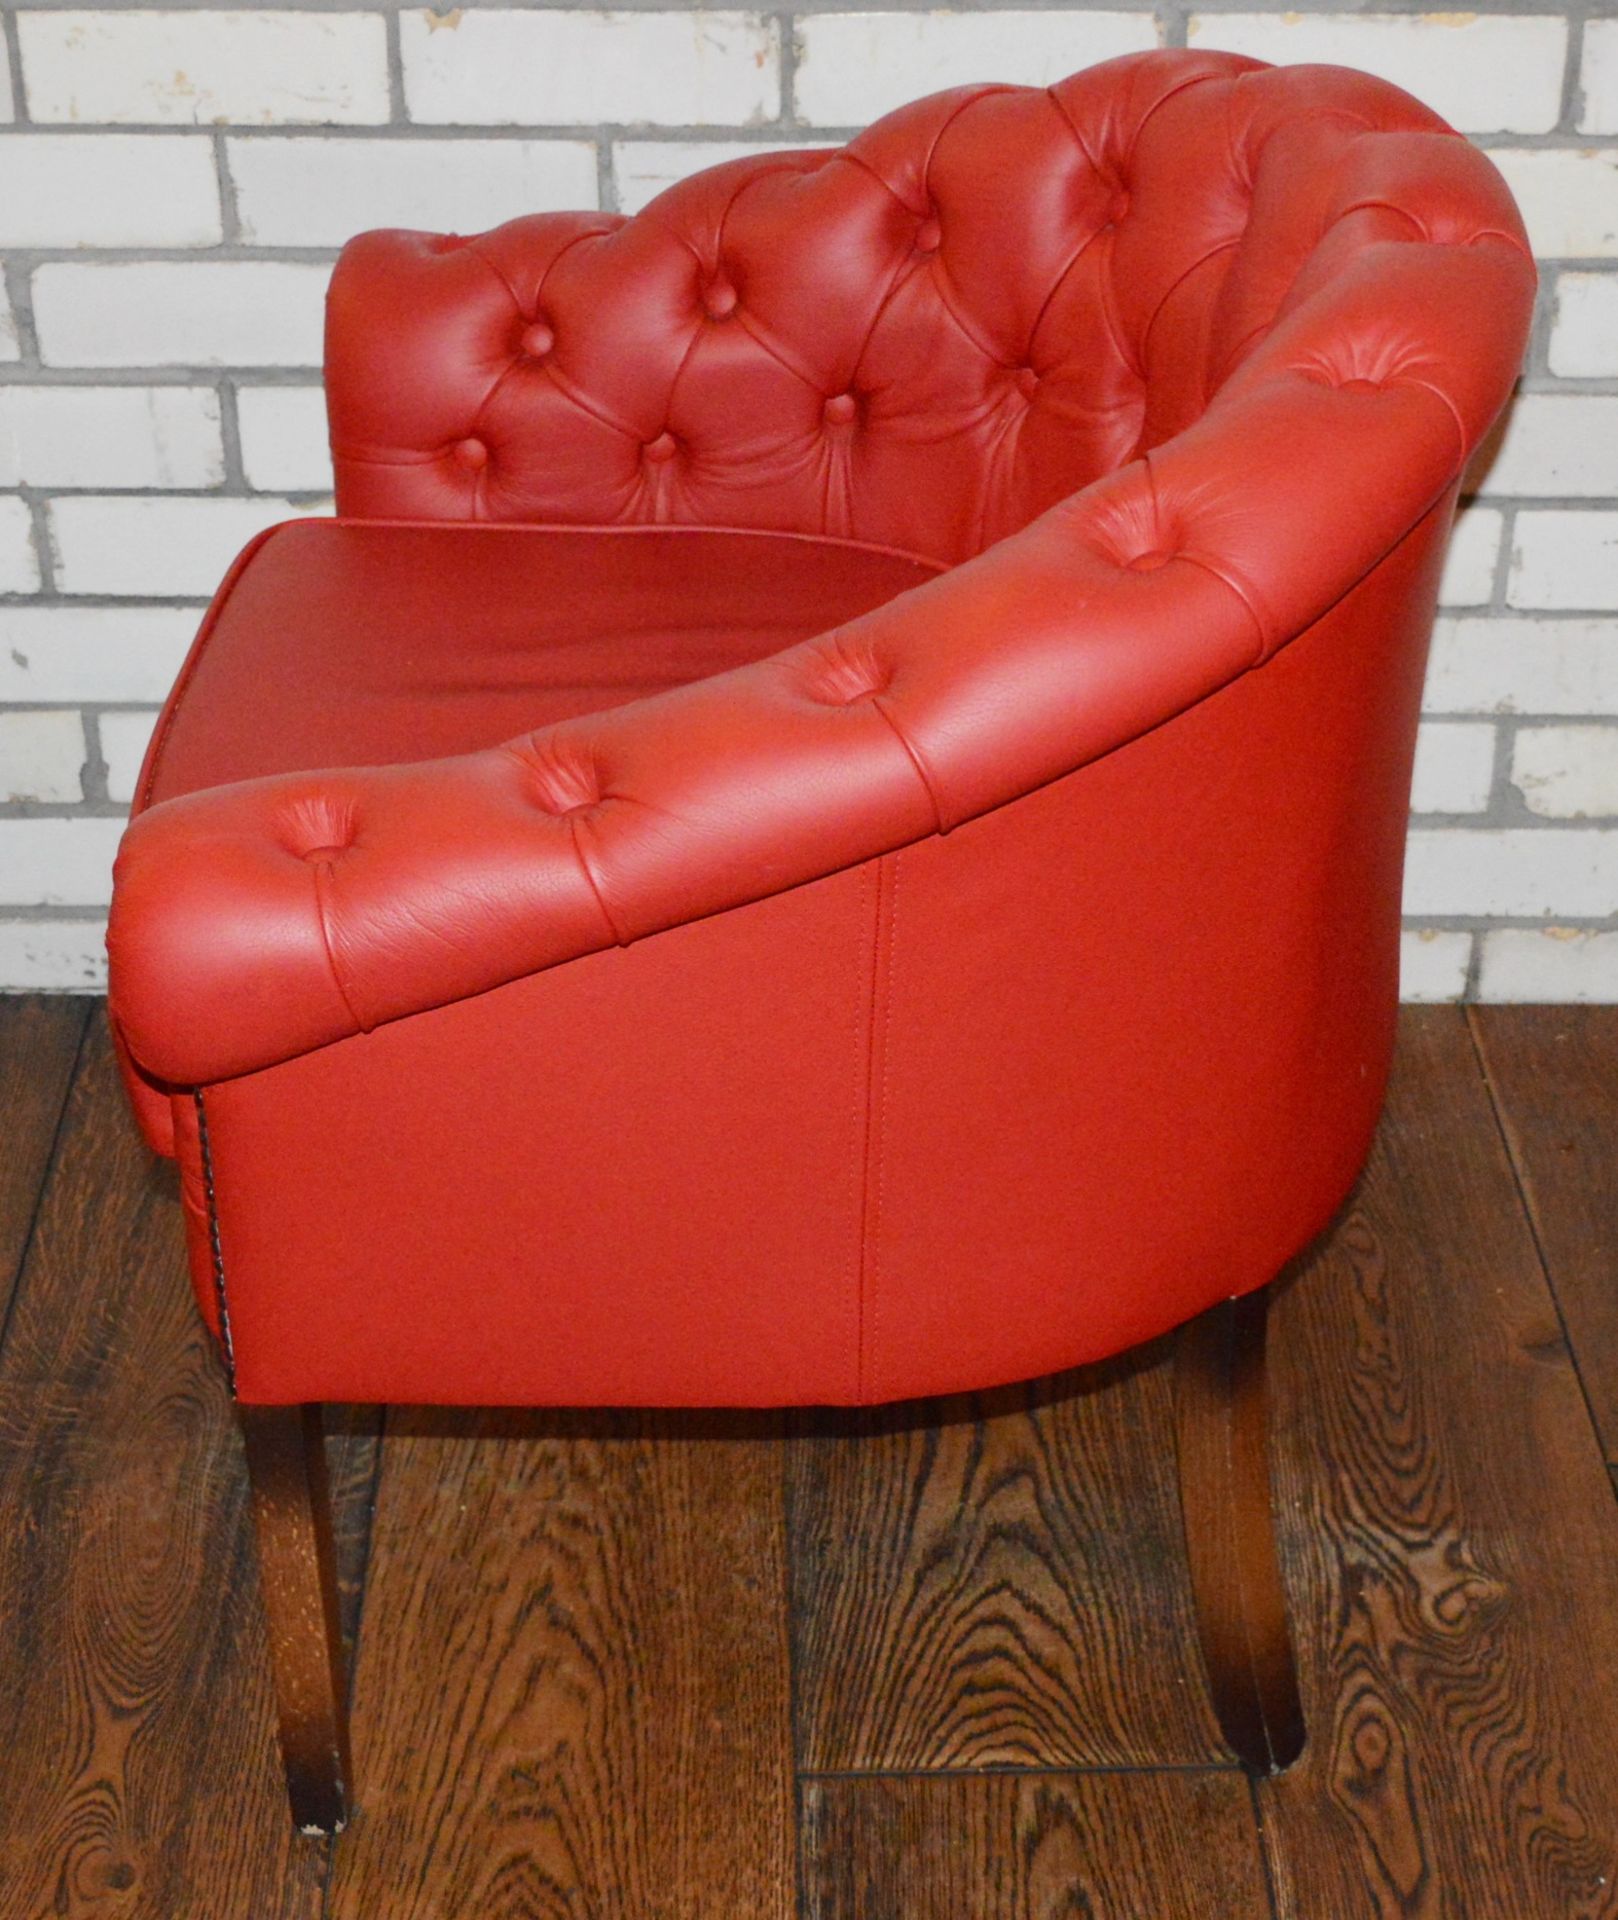 4 x Chesterfield Style Buttoned Back Red Leather Tub Chairs With Hardwood Legs Finished in an - Image 3 of 8